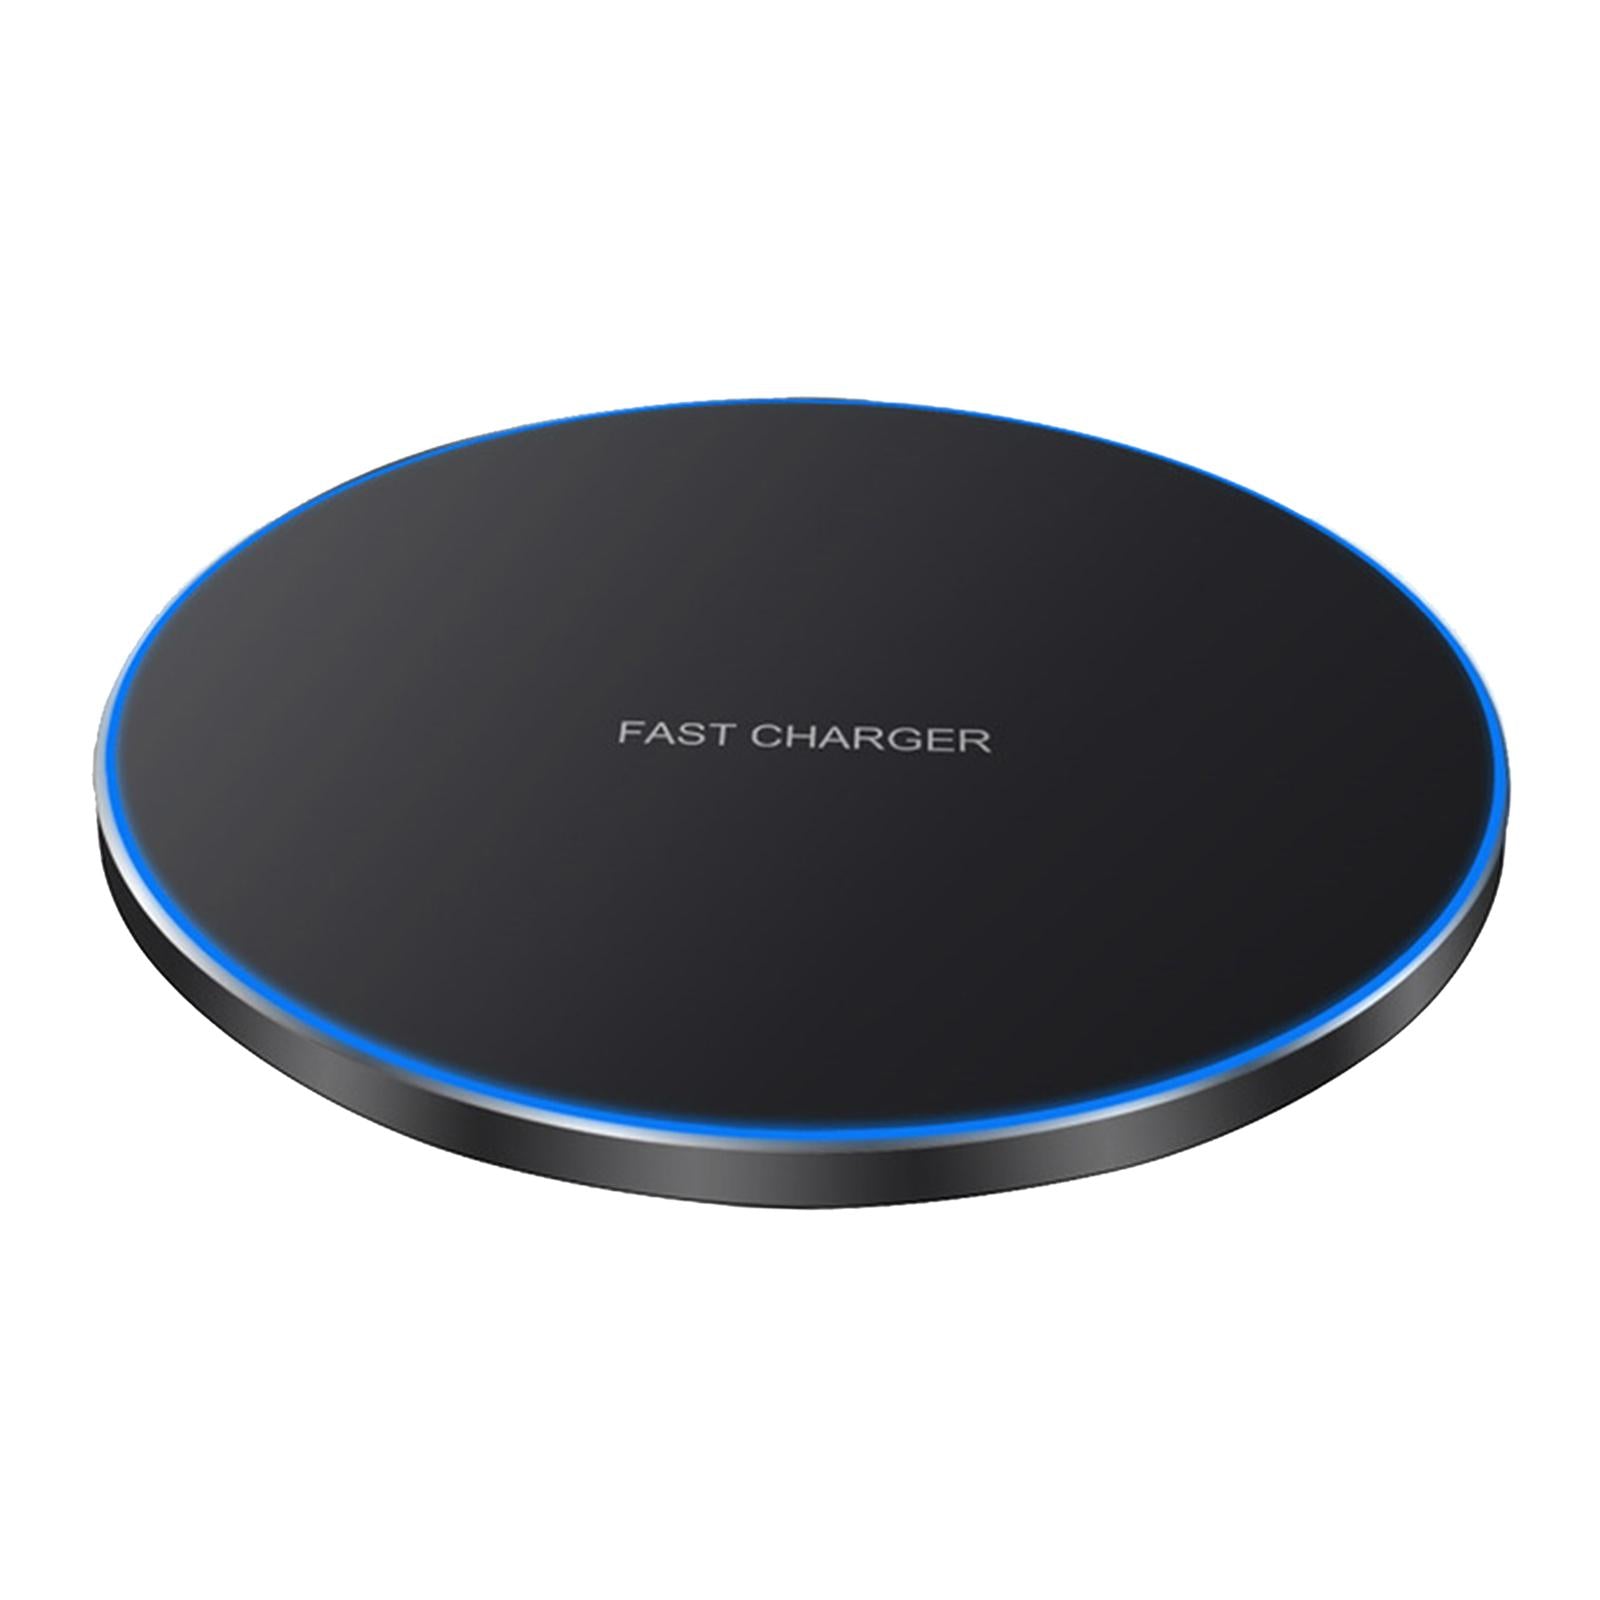 Ultra Slim Qi Wireless Charger 30W Max Pad Station for iPhone 12 X  black